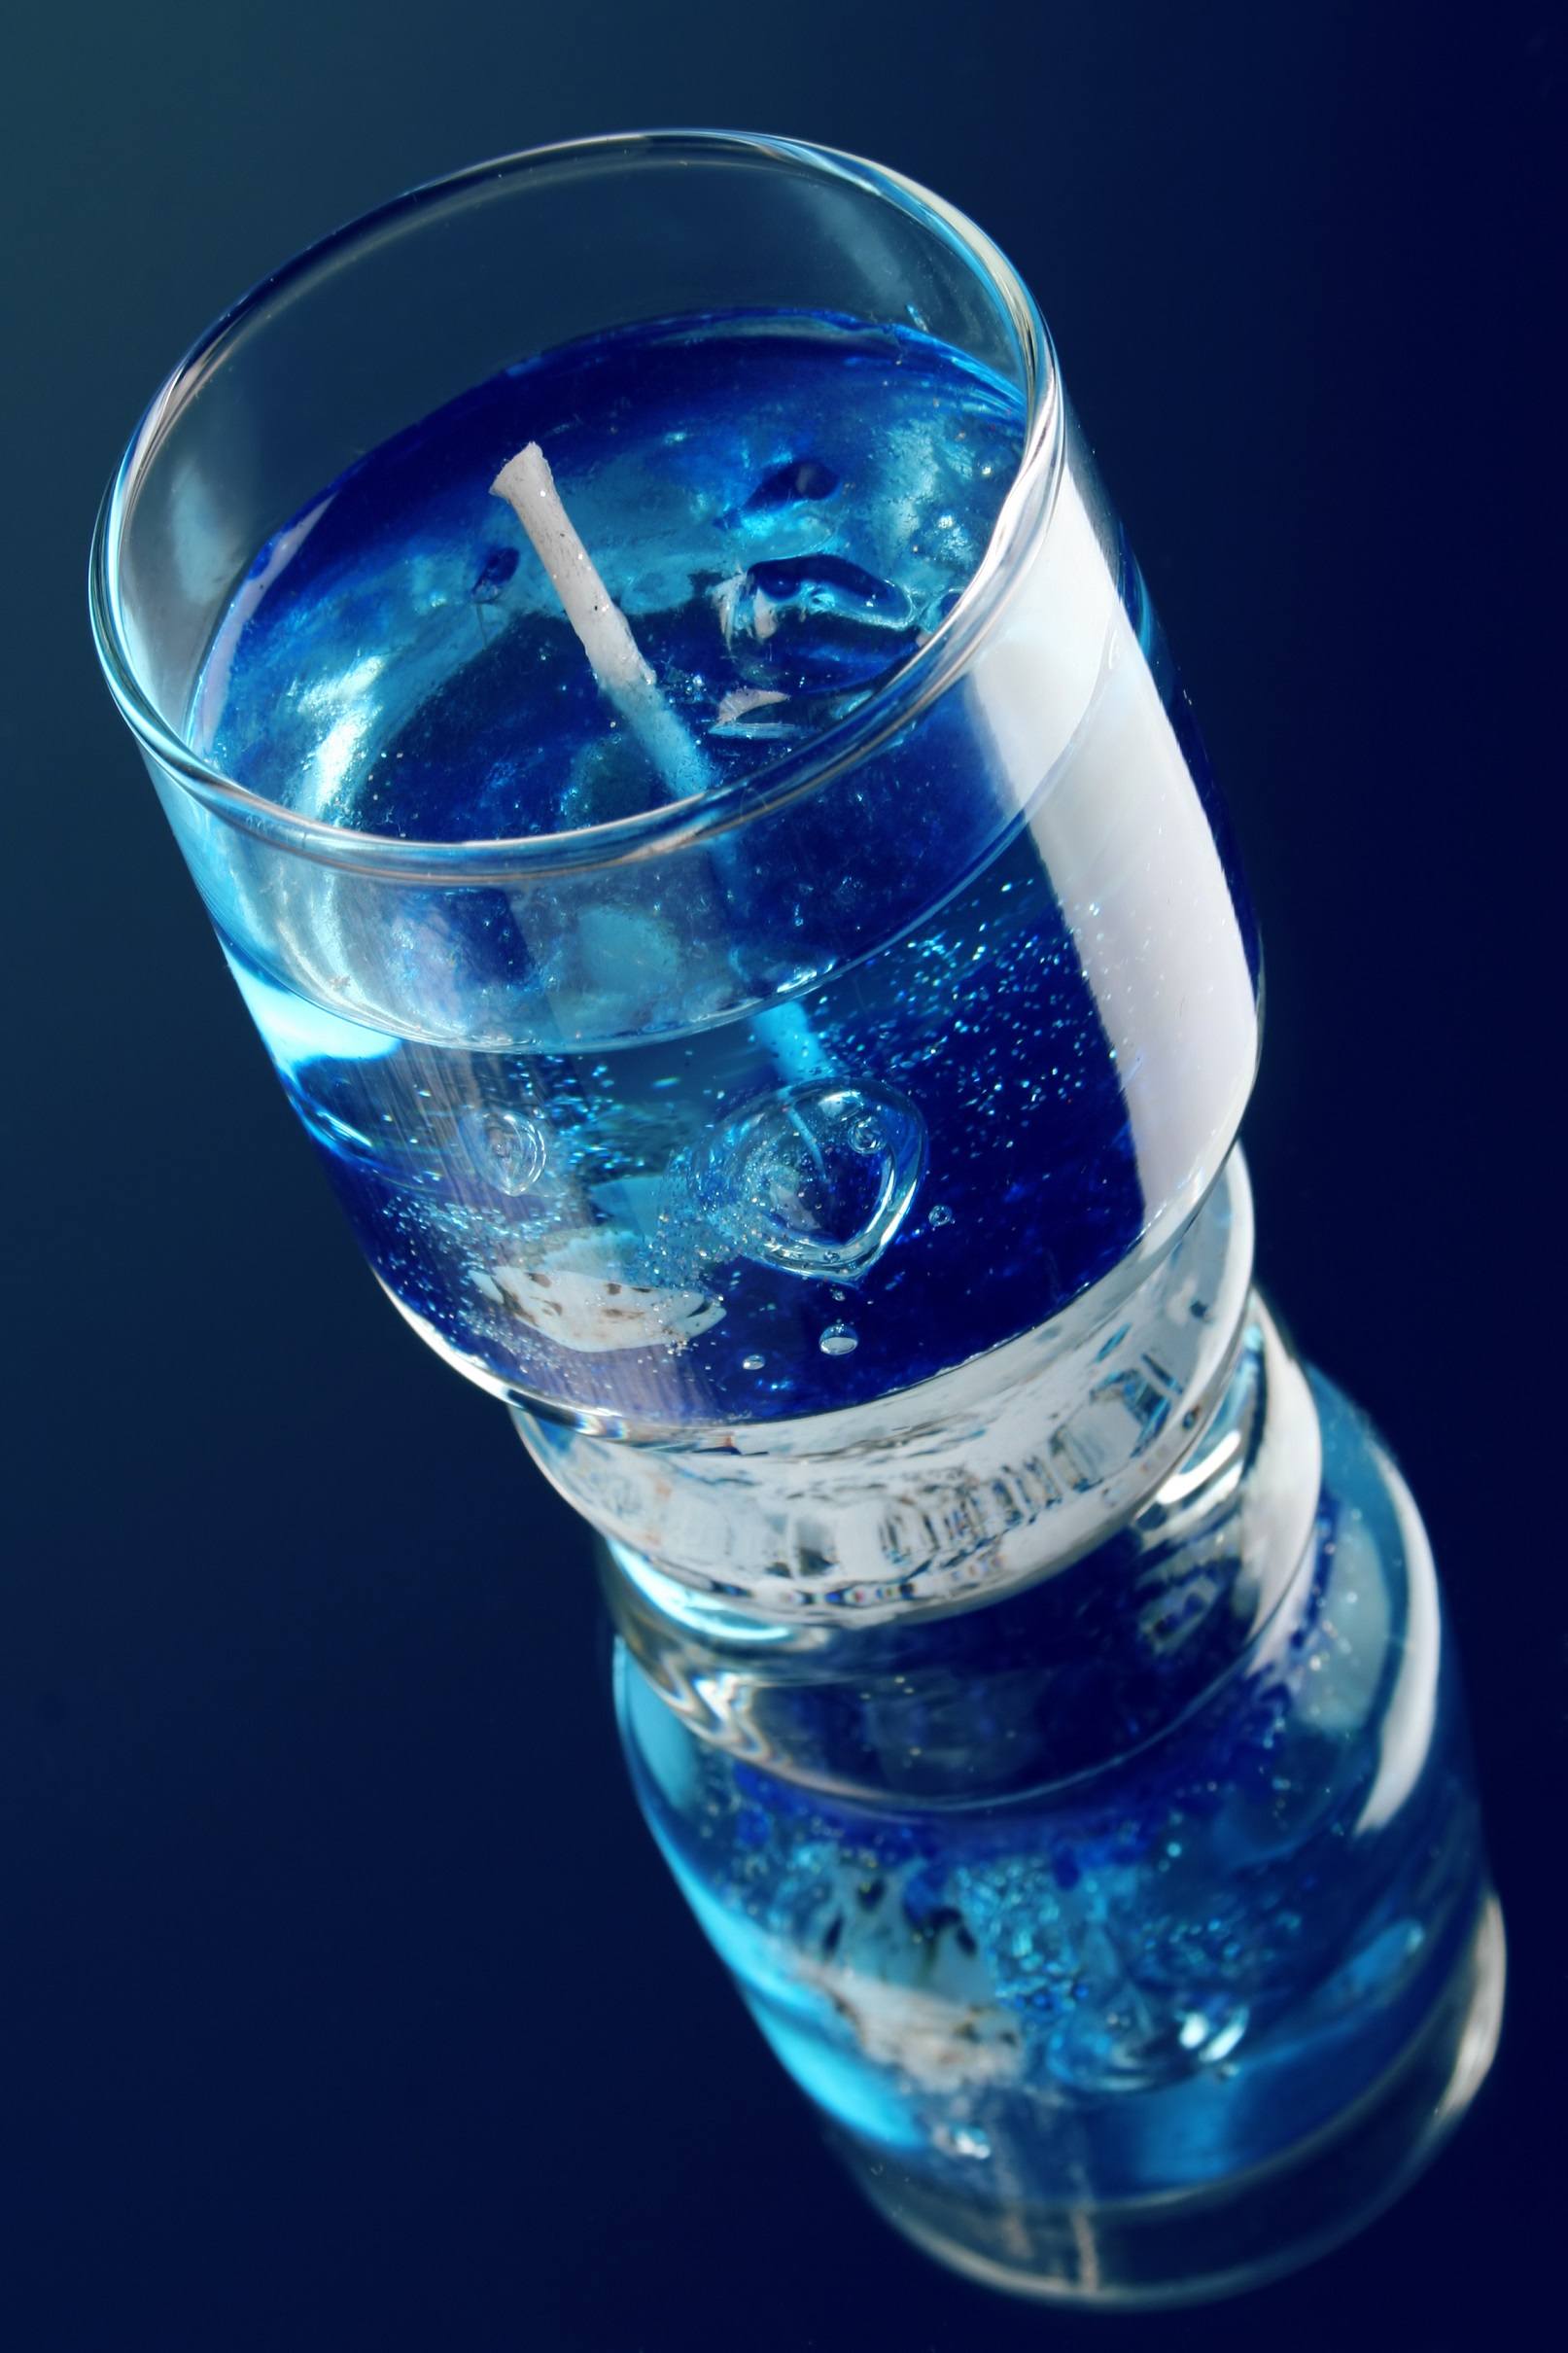 Gel candle on blue background